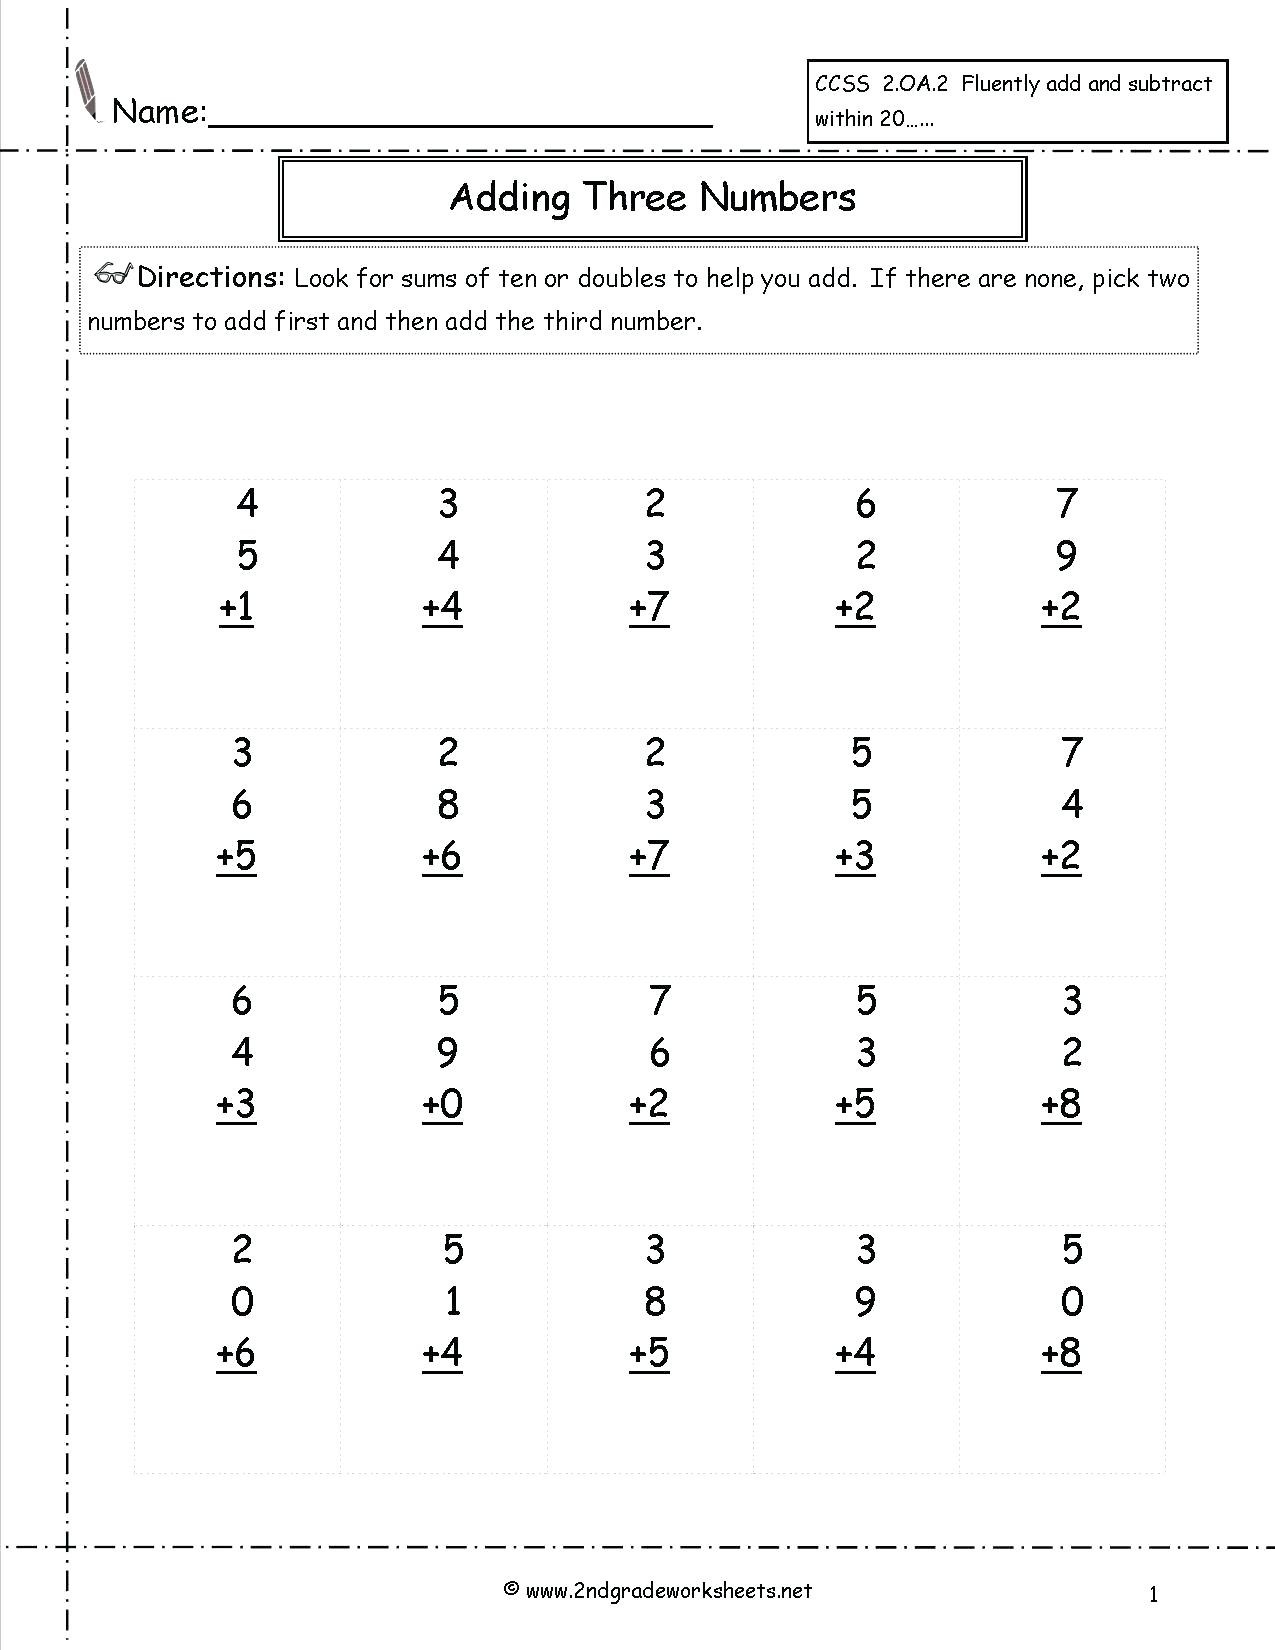 Free Math Worksheets Third Grade 3 Fractions and Decimals Subtracting Fractions From whole Numbers